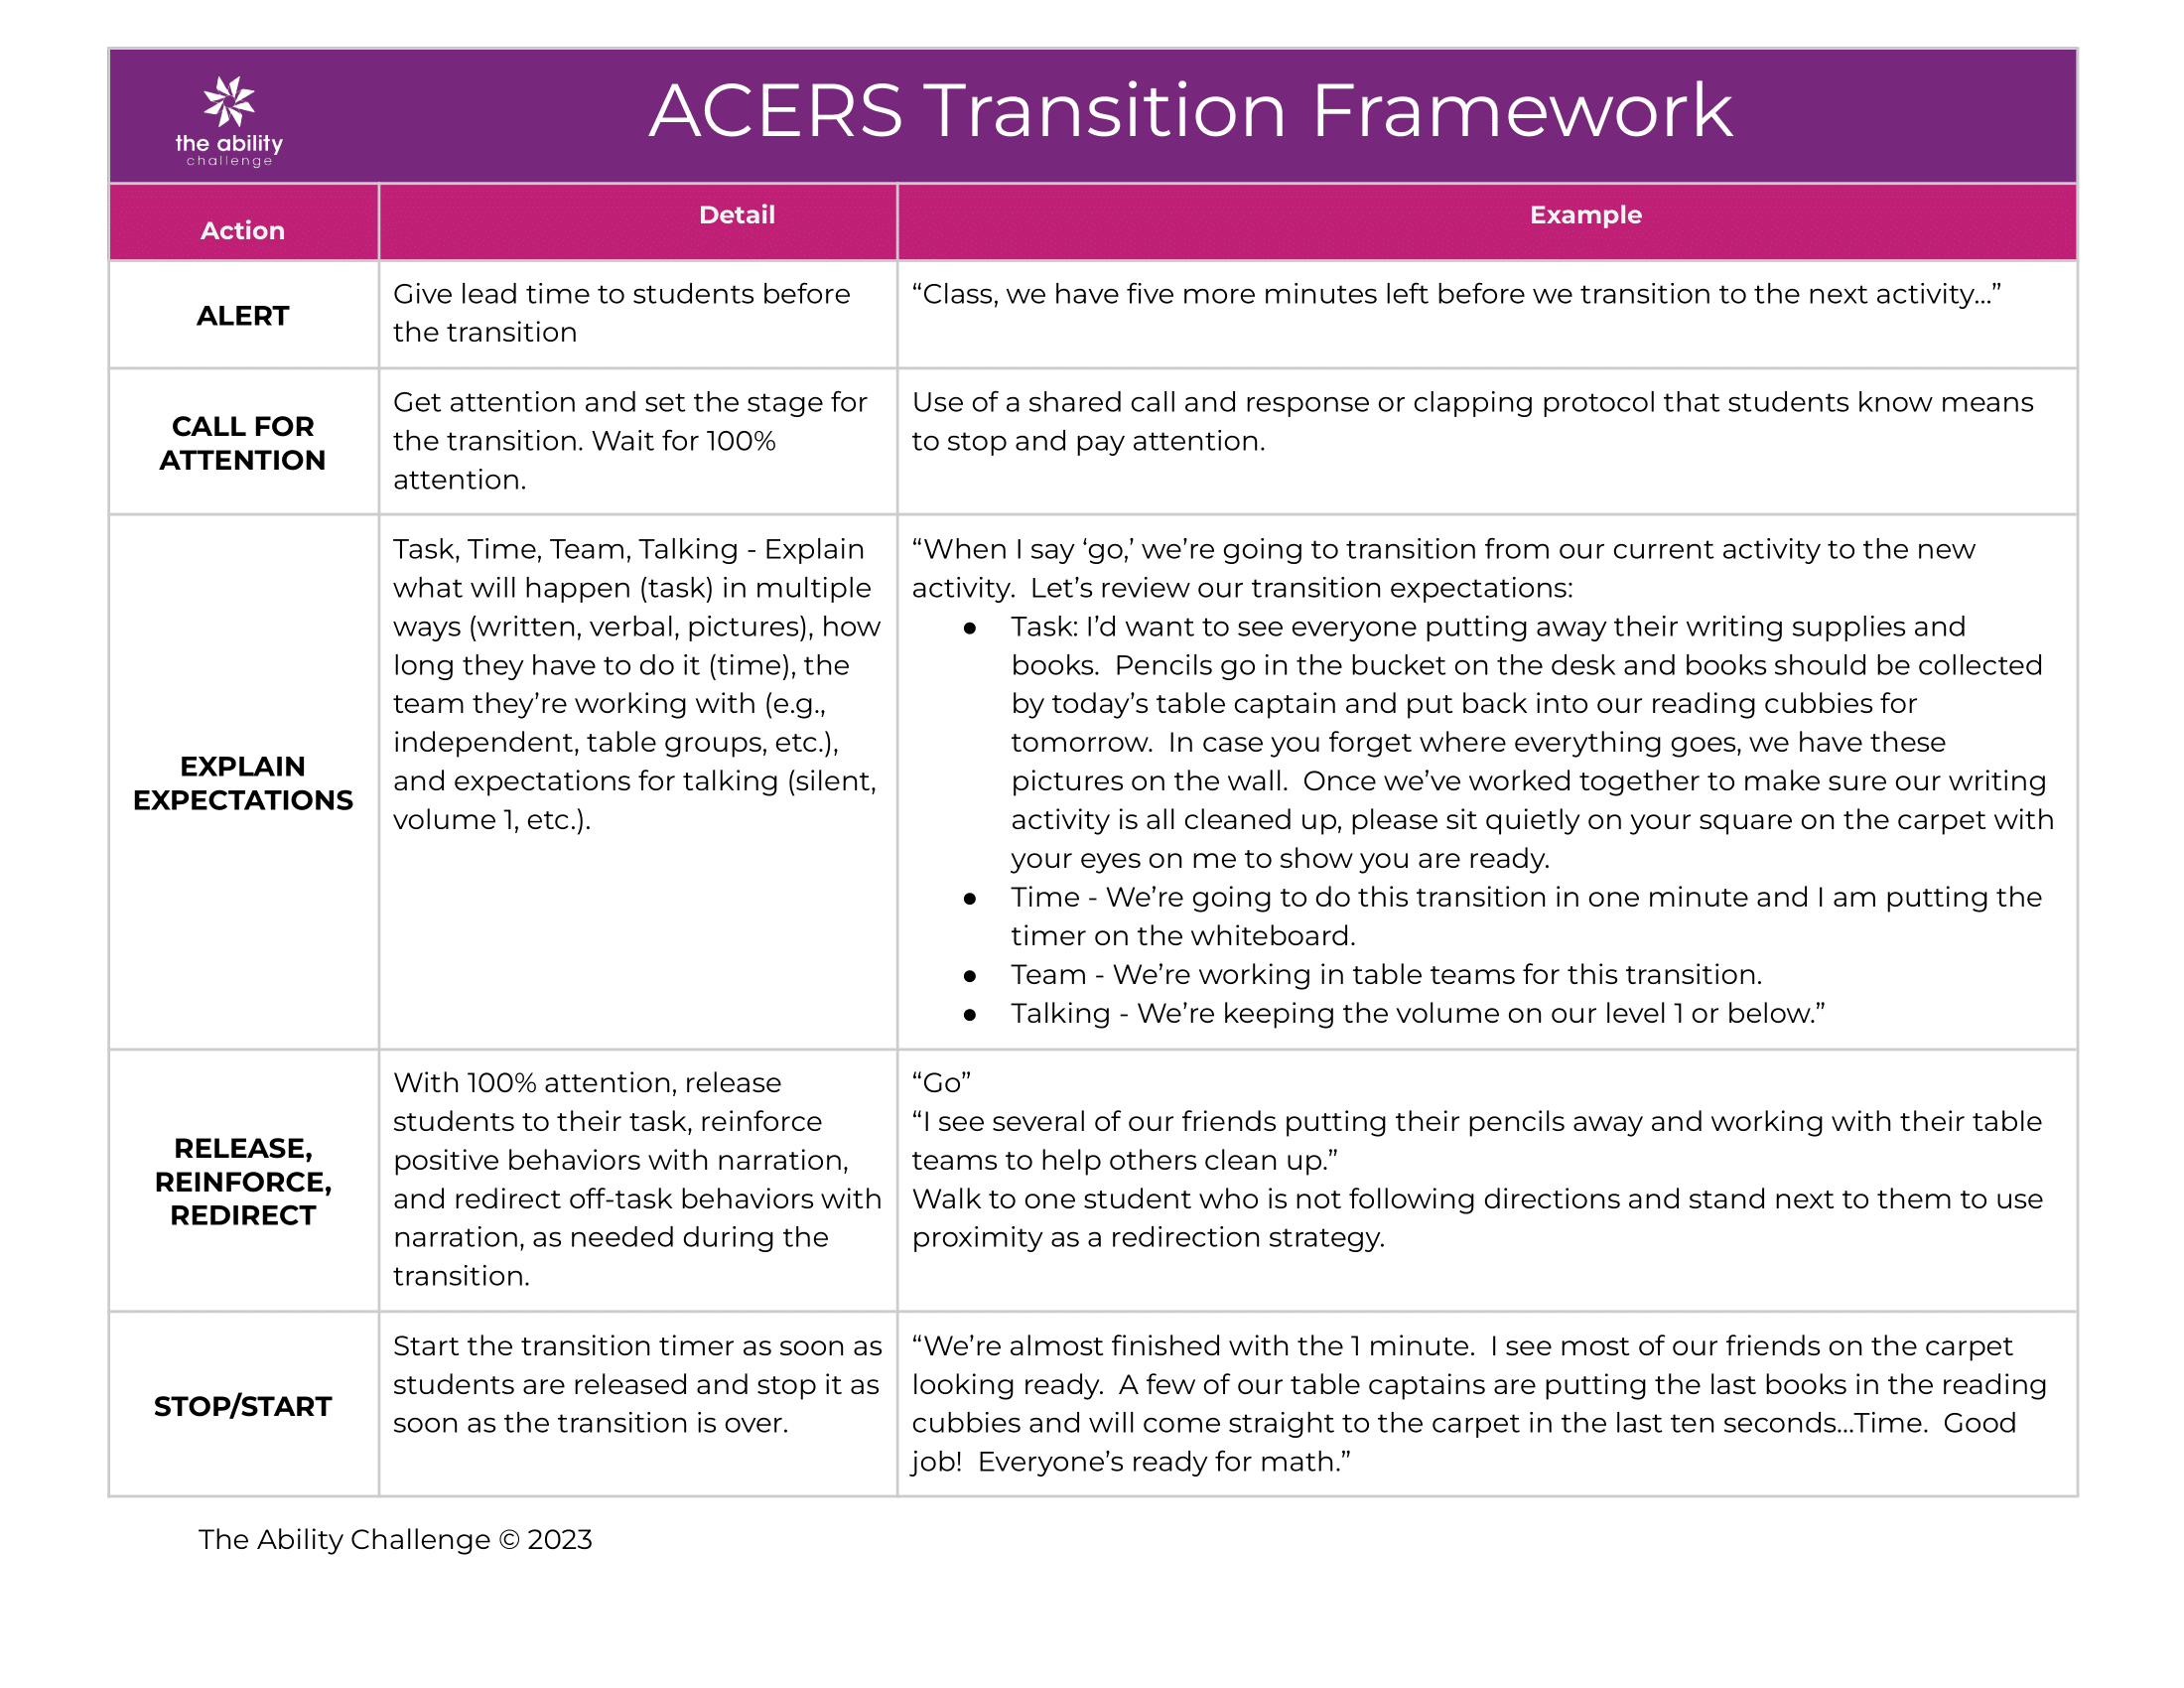 Acers Transition Framework from the Ability Challenge